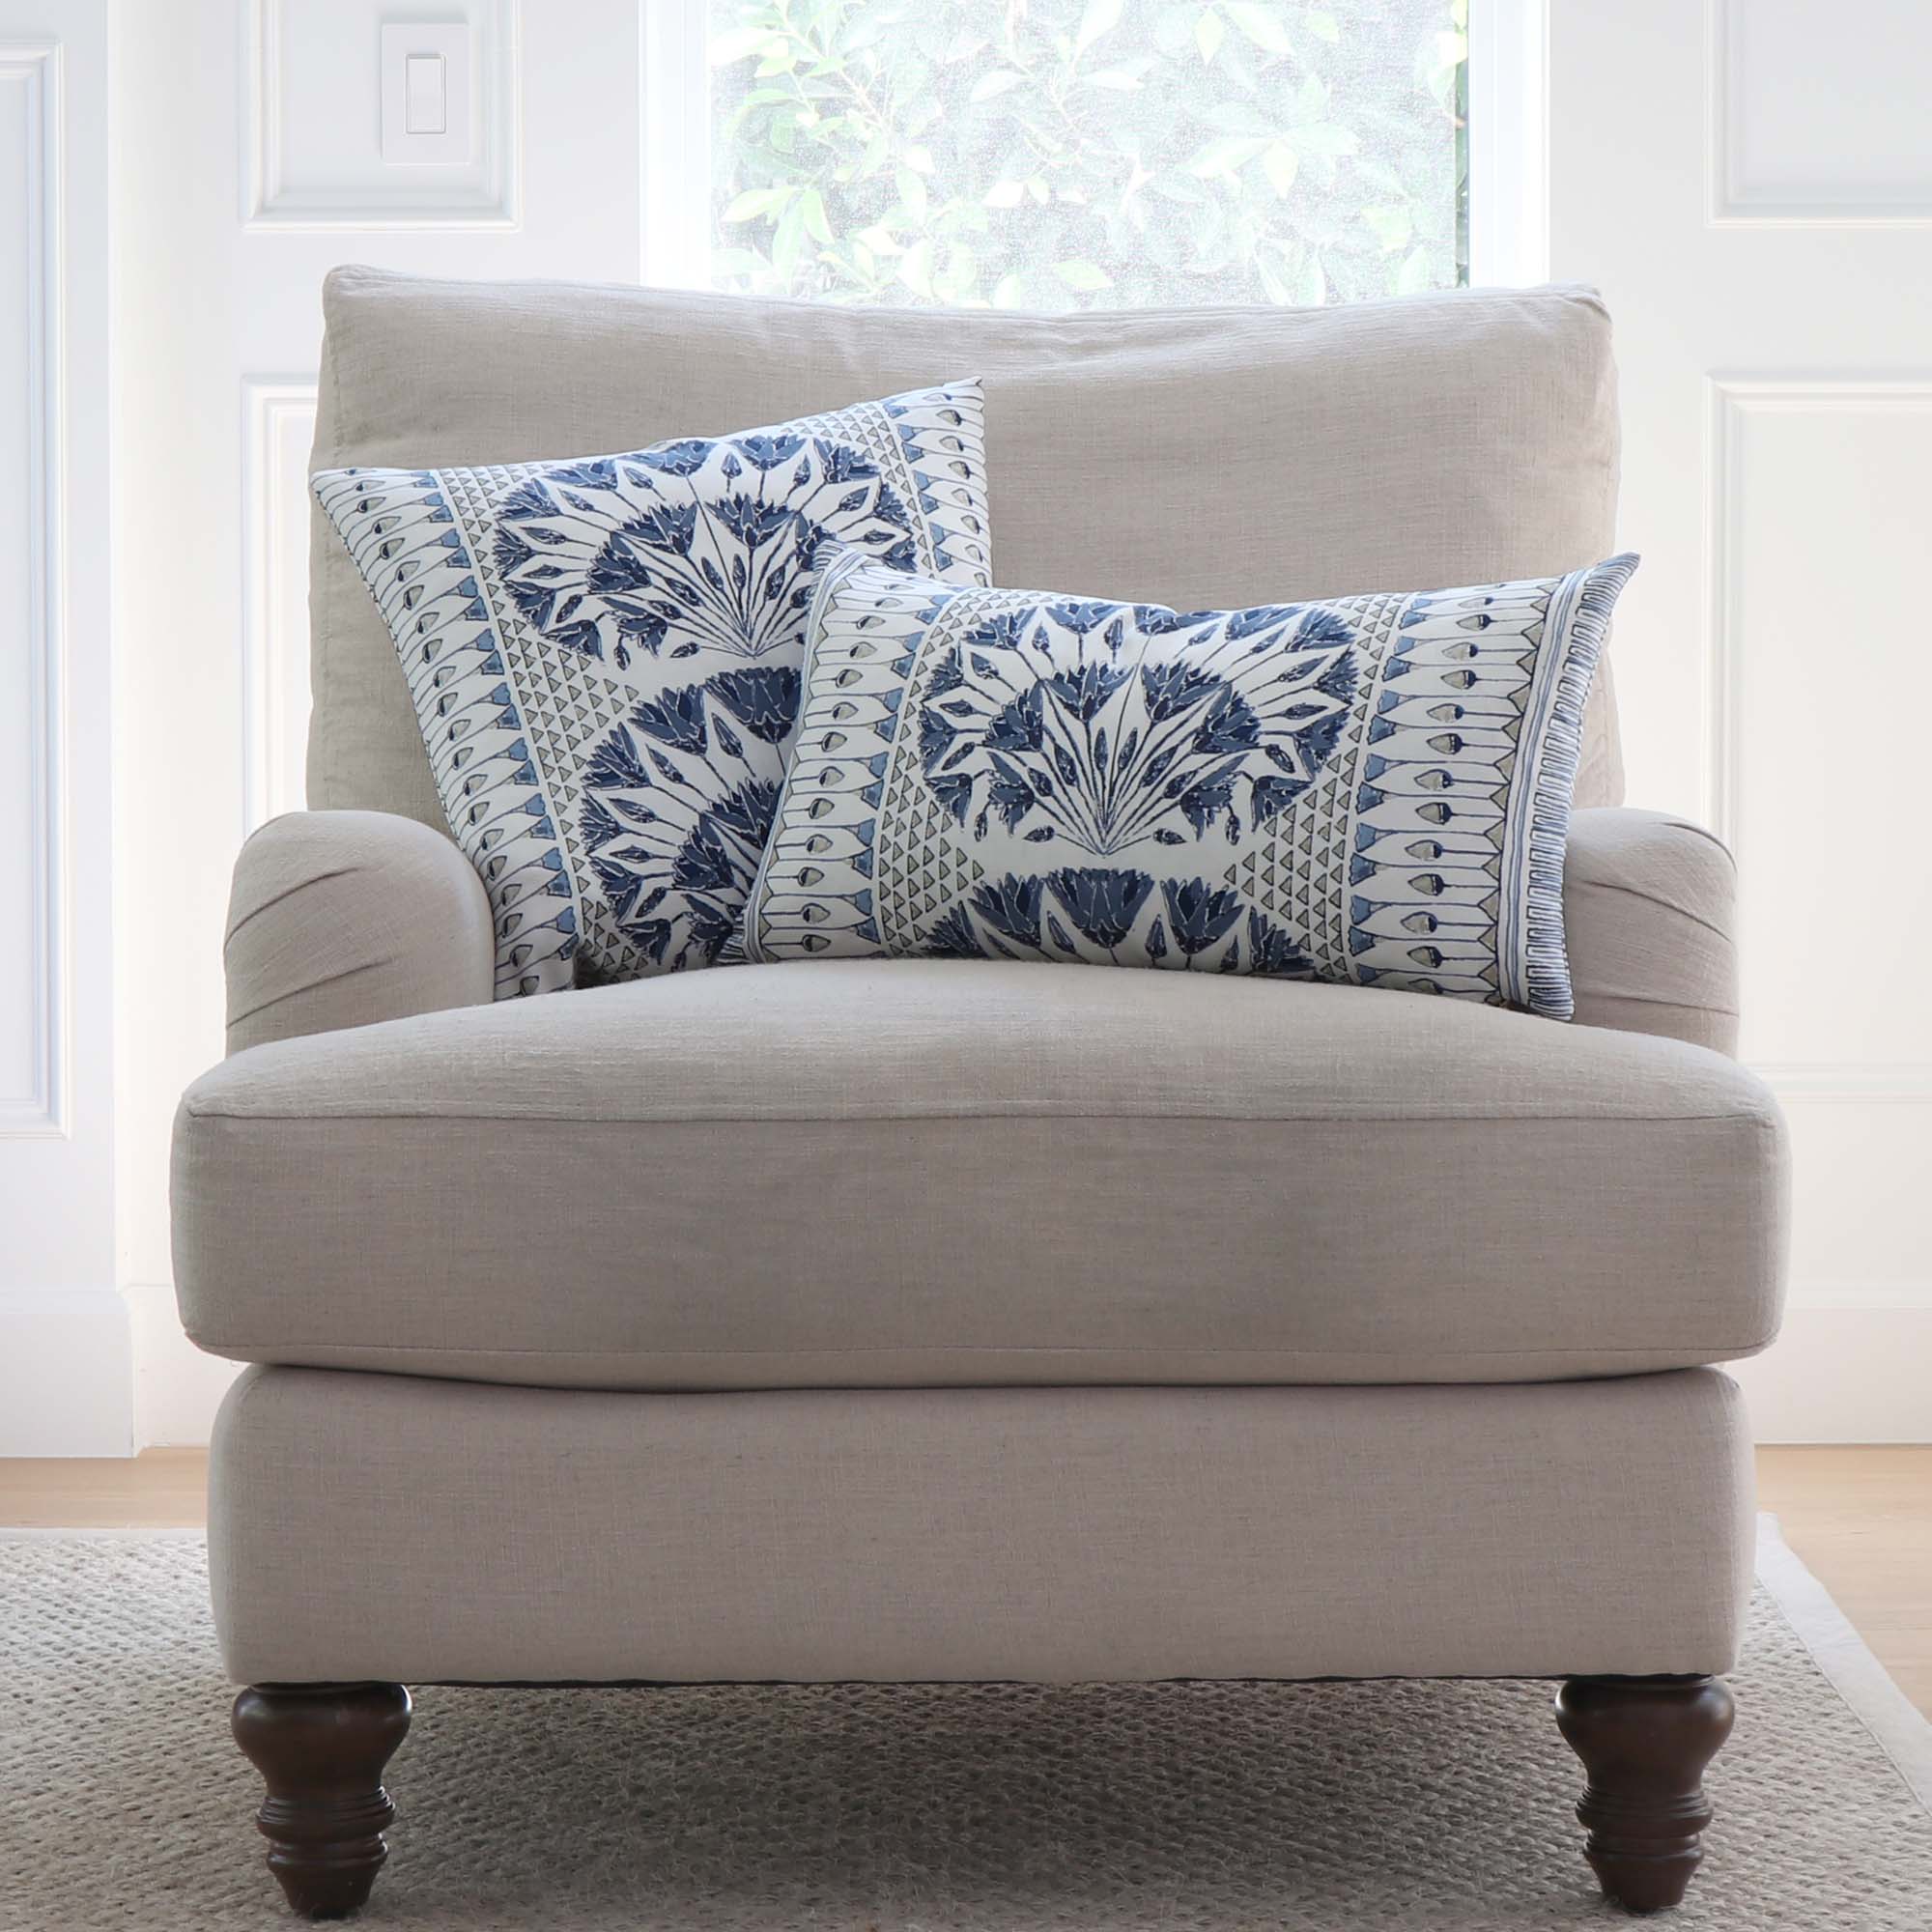 Thibaut Anna French Cairo Floral Blue Designer Luxury Throw Pillow Cover on Large Accent Arm Chair